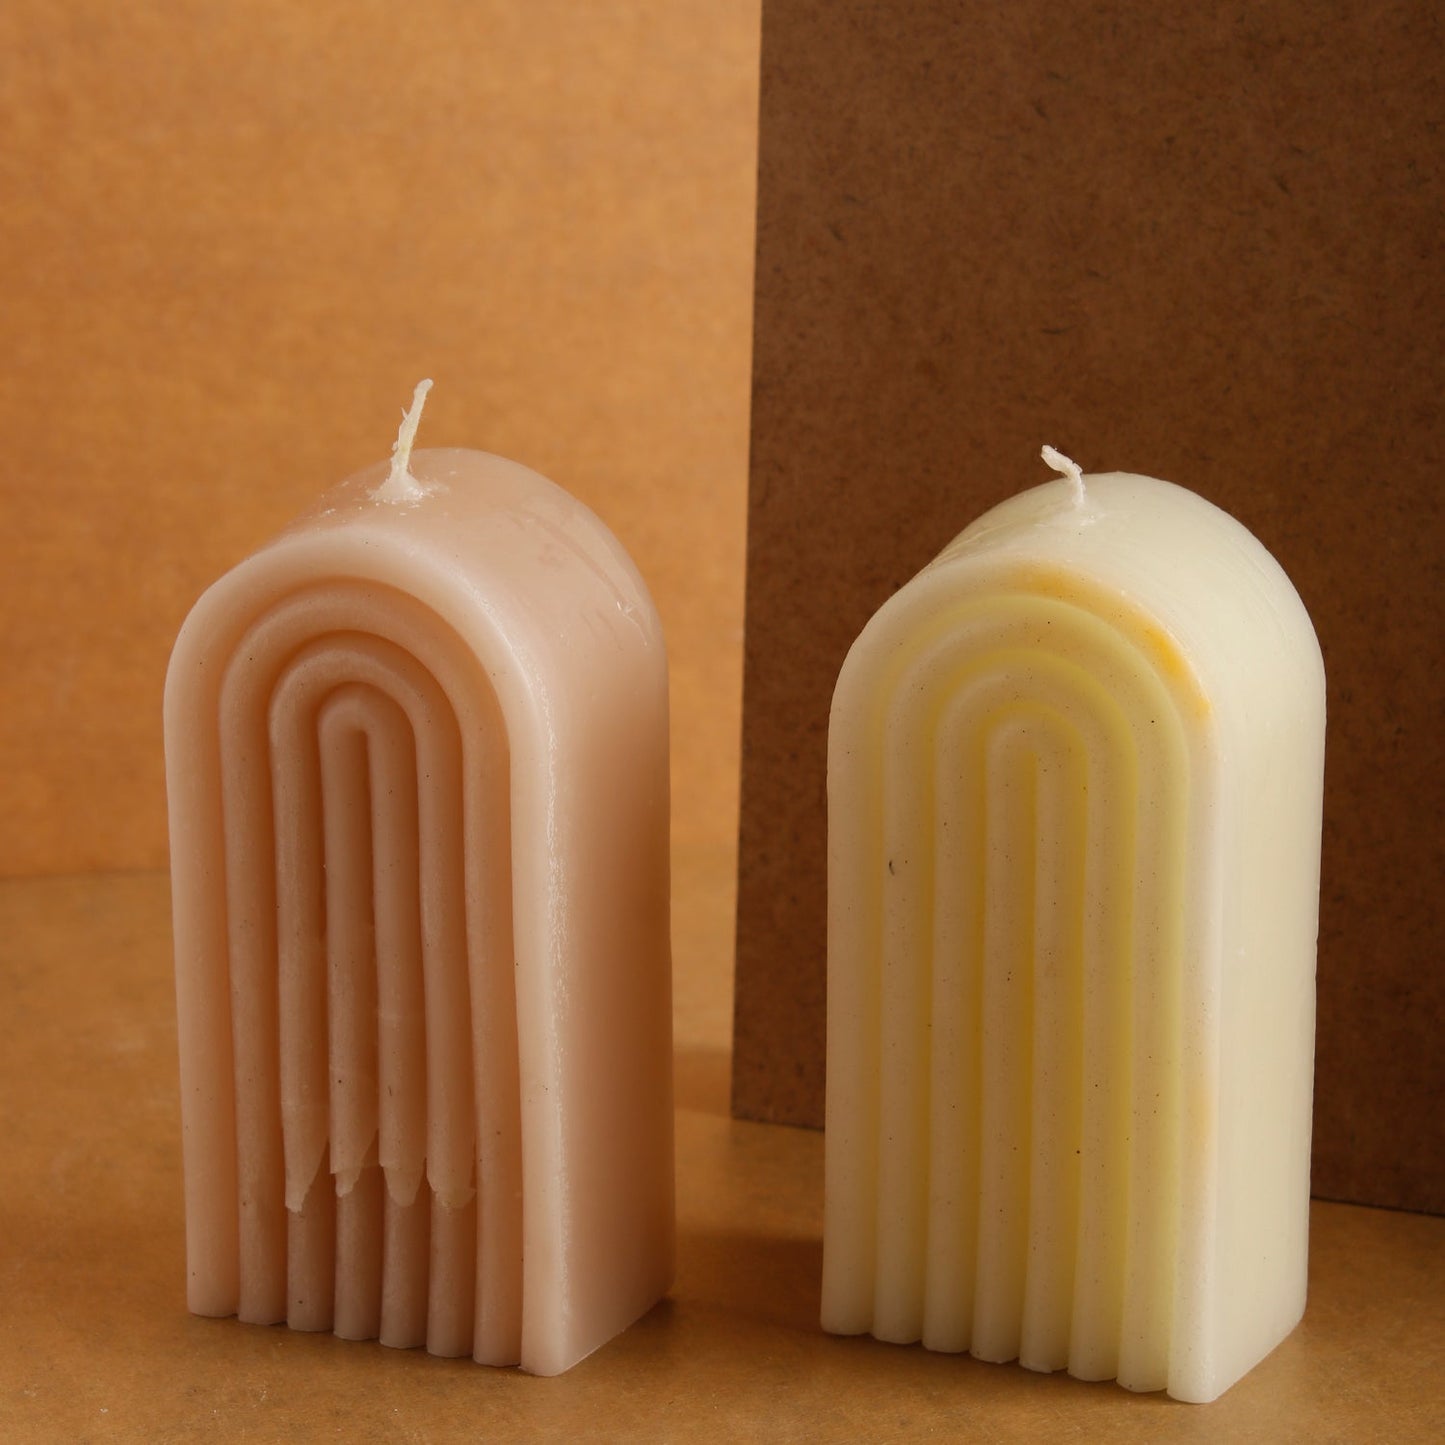 Dual Spiral Arch Candles